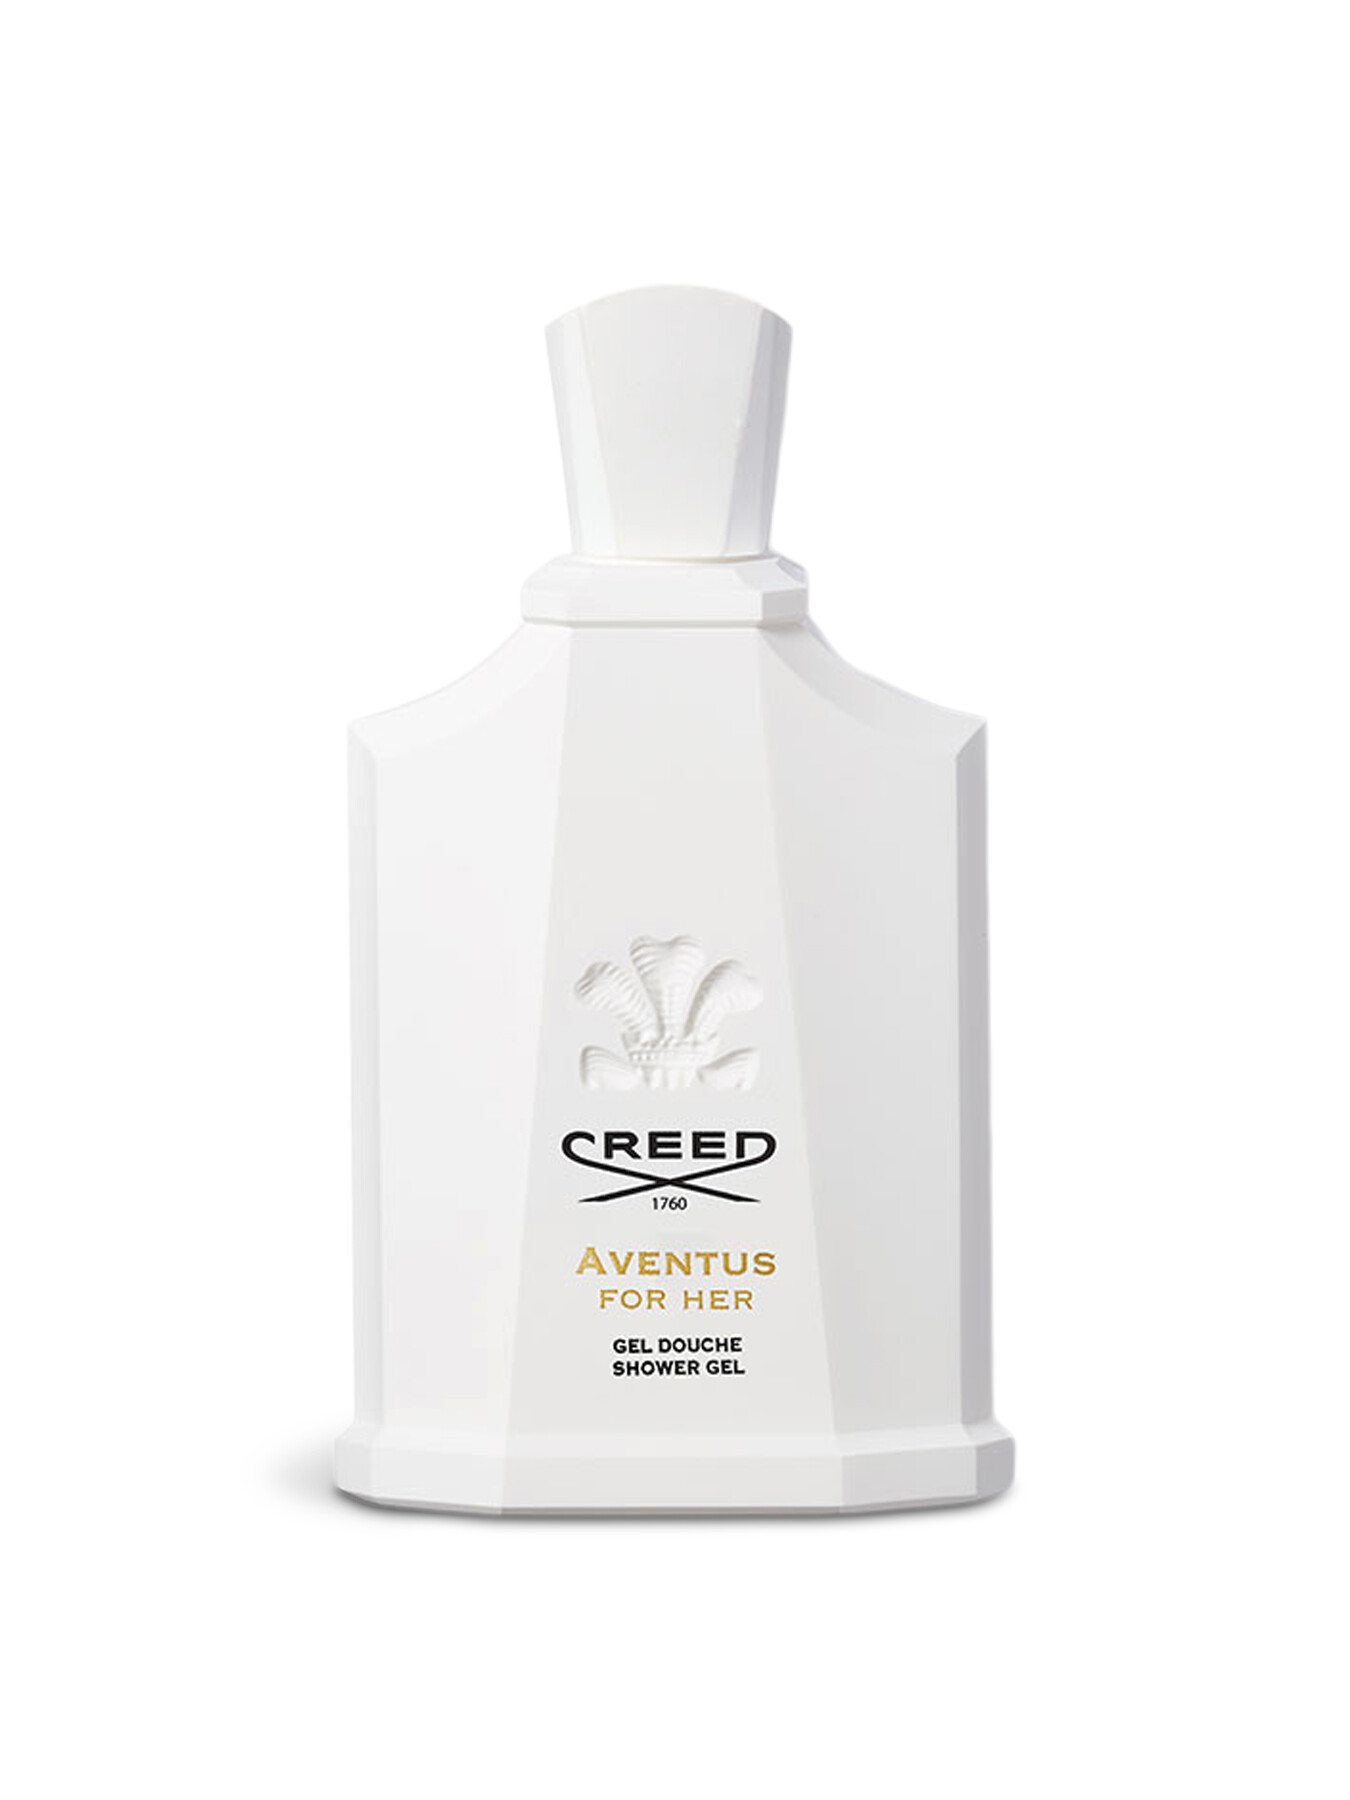 Creed Aventus For Her Shower Gel 200ml In White